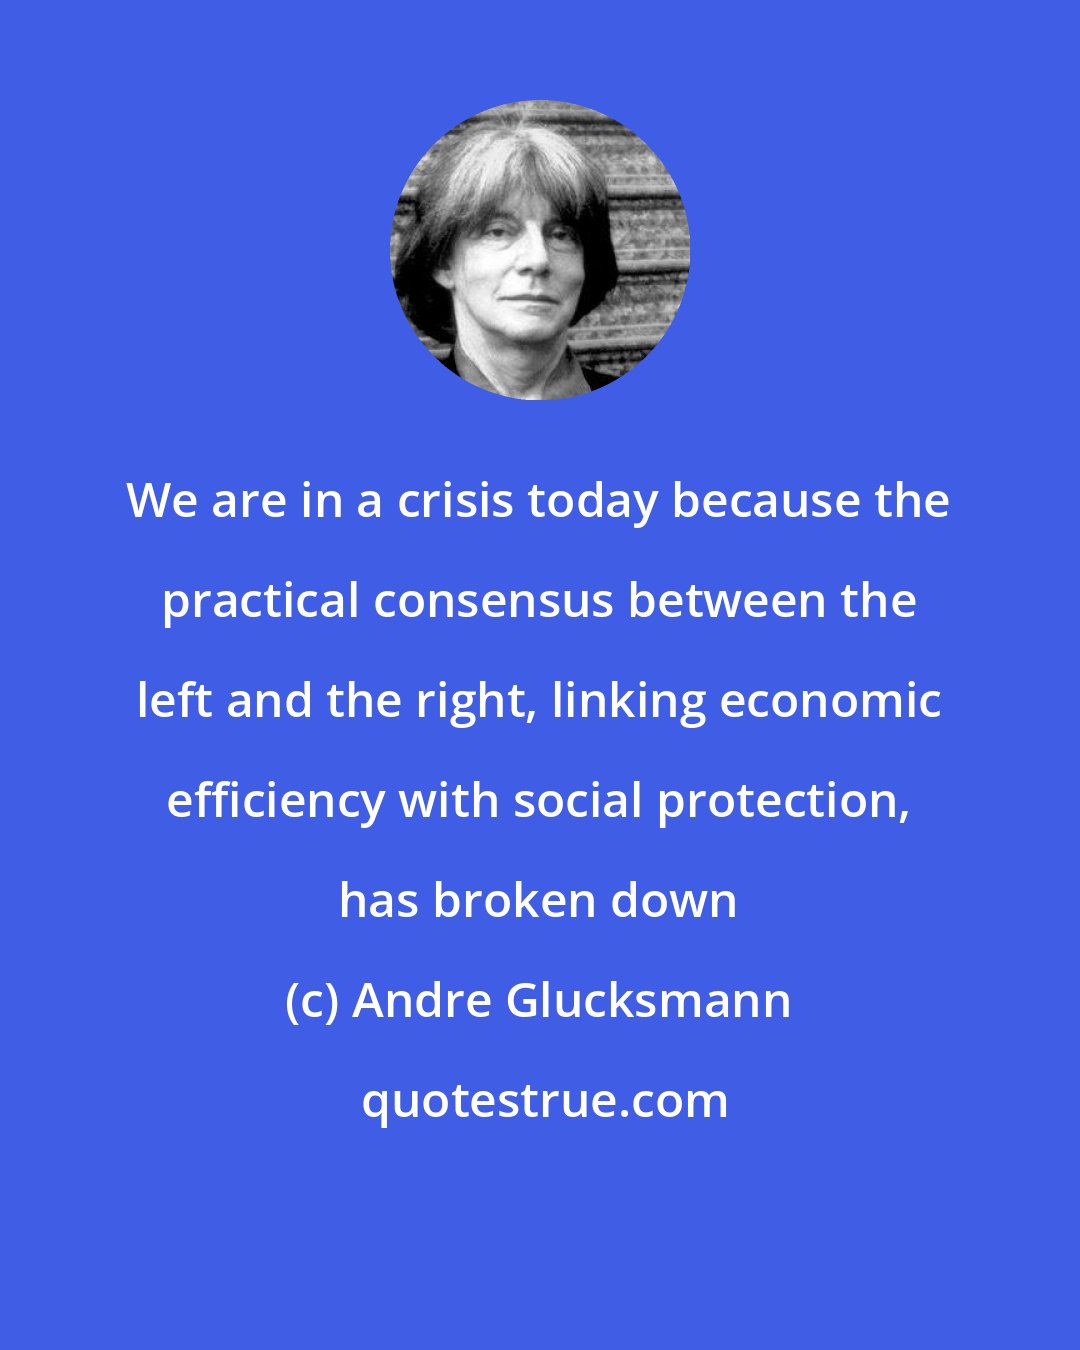 Andre Glucksmann: We are in a crisis today because the practical consensus between the left and the right, linking economic efficiency with social protection, has broken down